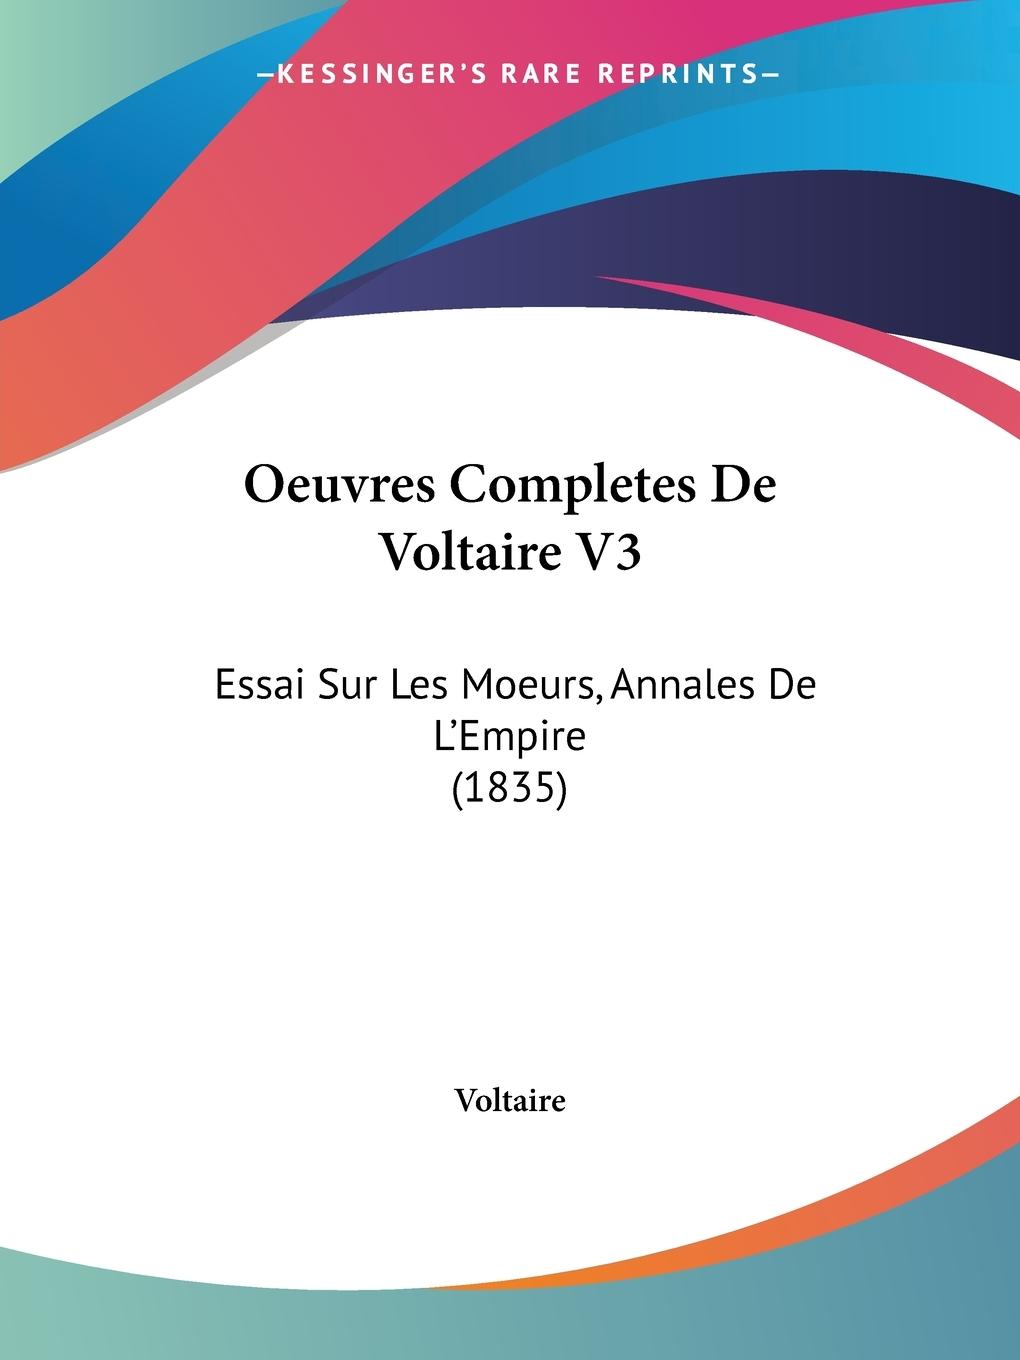 Oeuvres Completes De Voltaire V3 - Voltaire